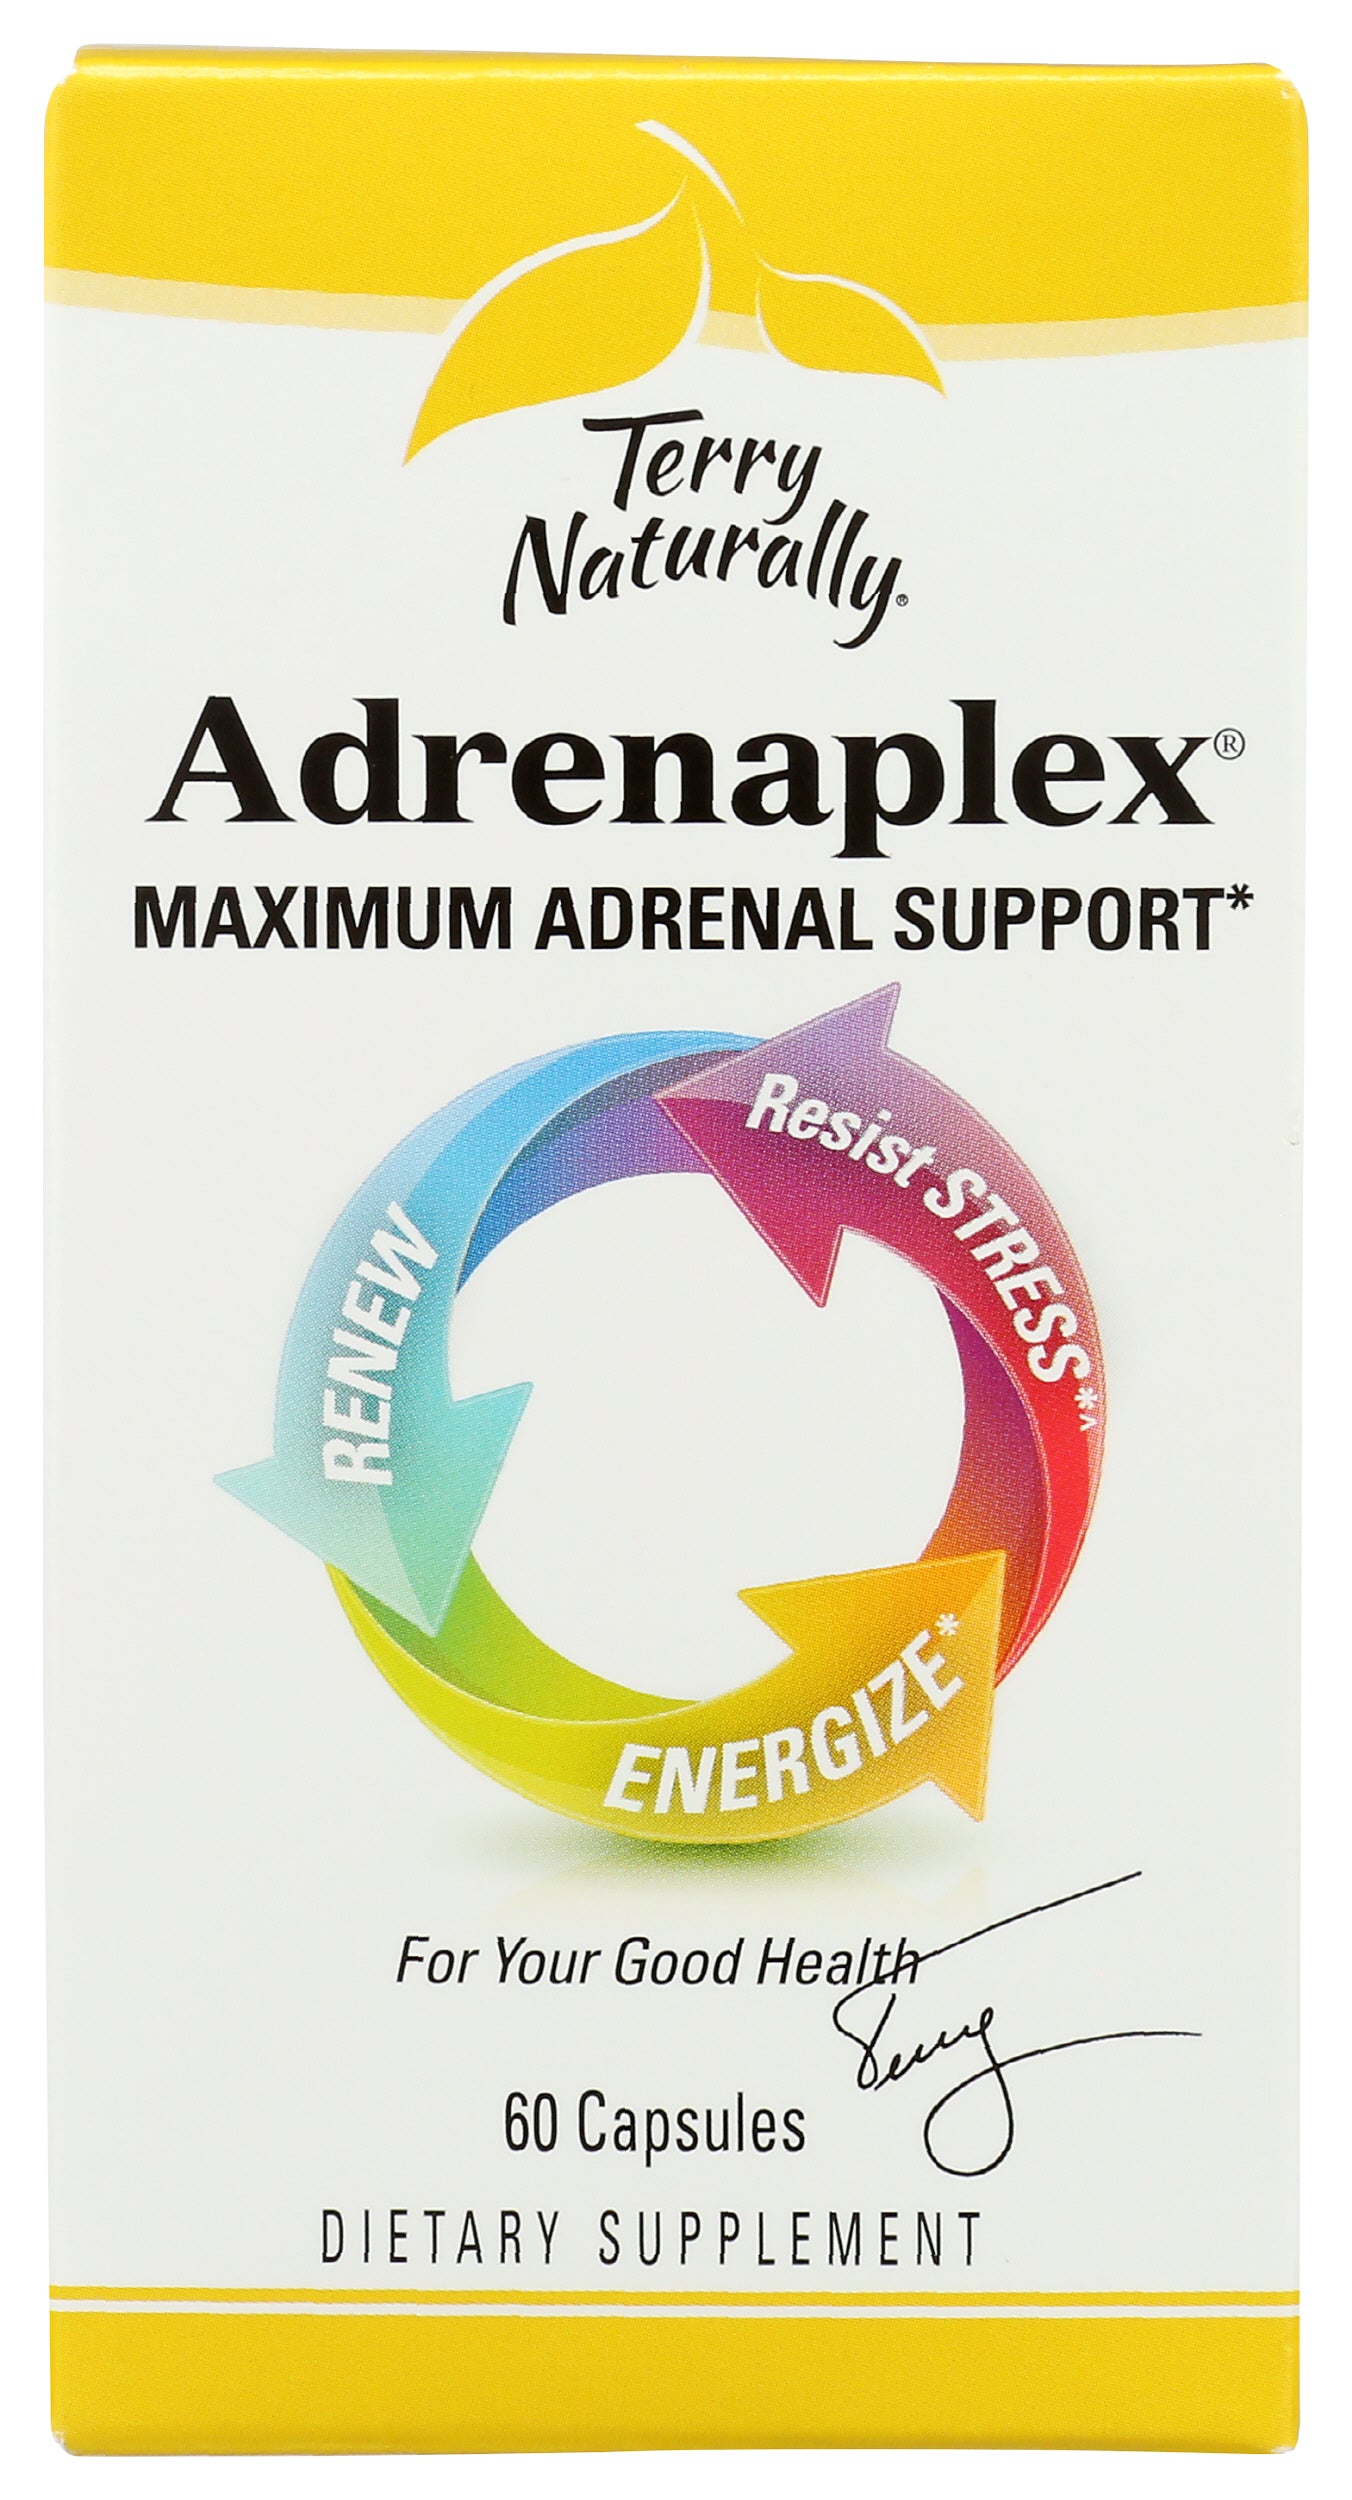 Terry Naturally Adrenaplex 60 Capsules Front of Box